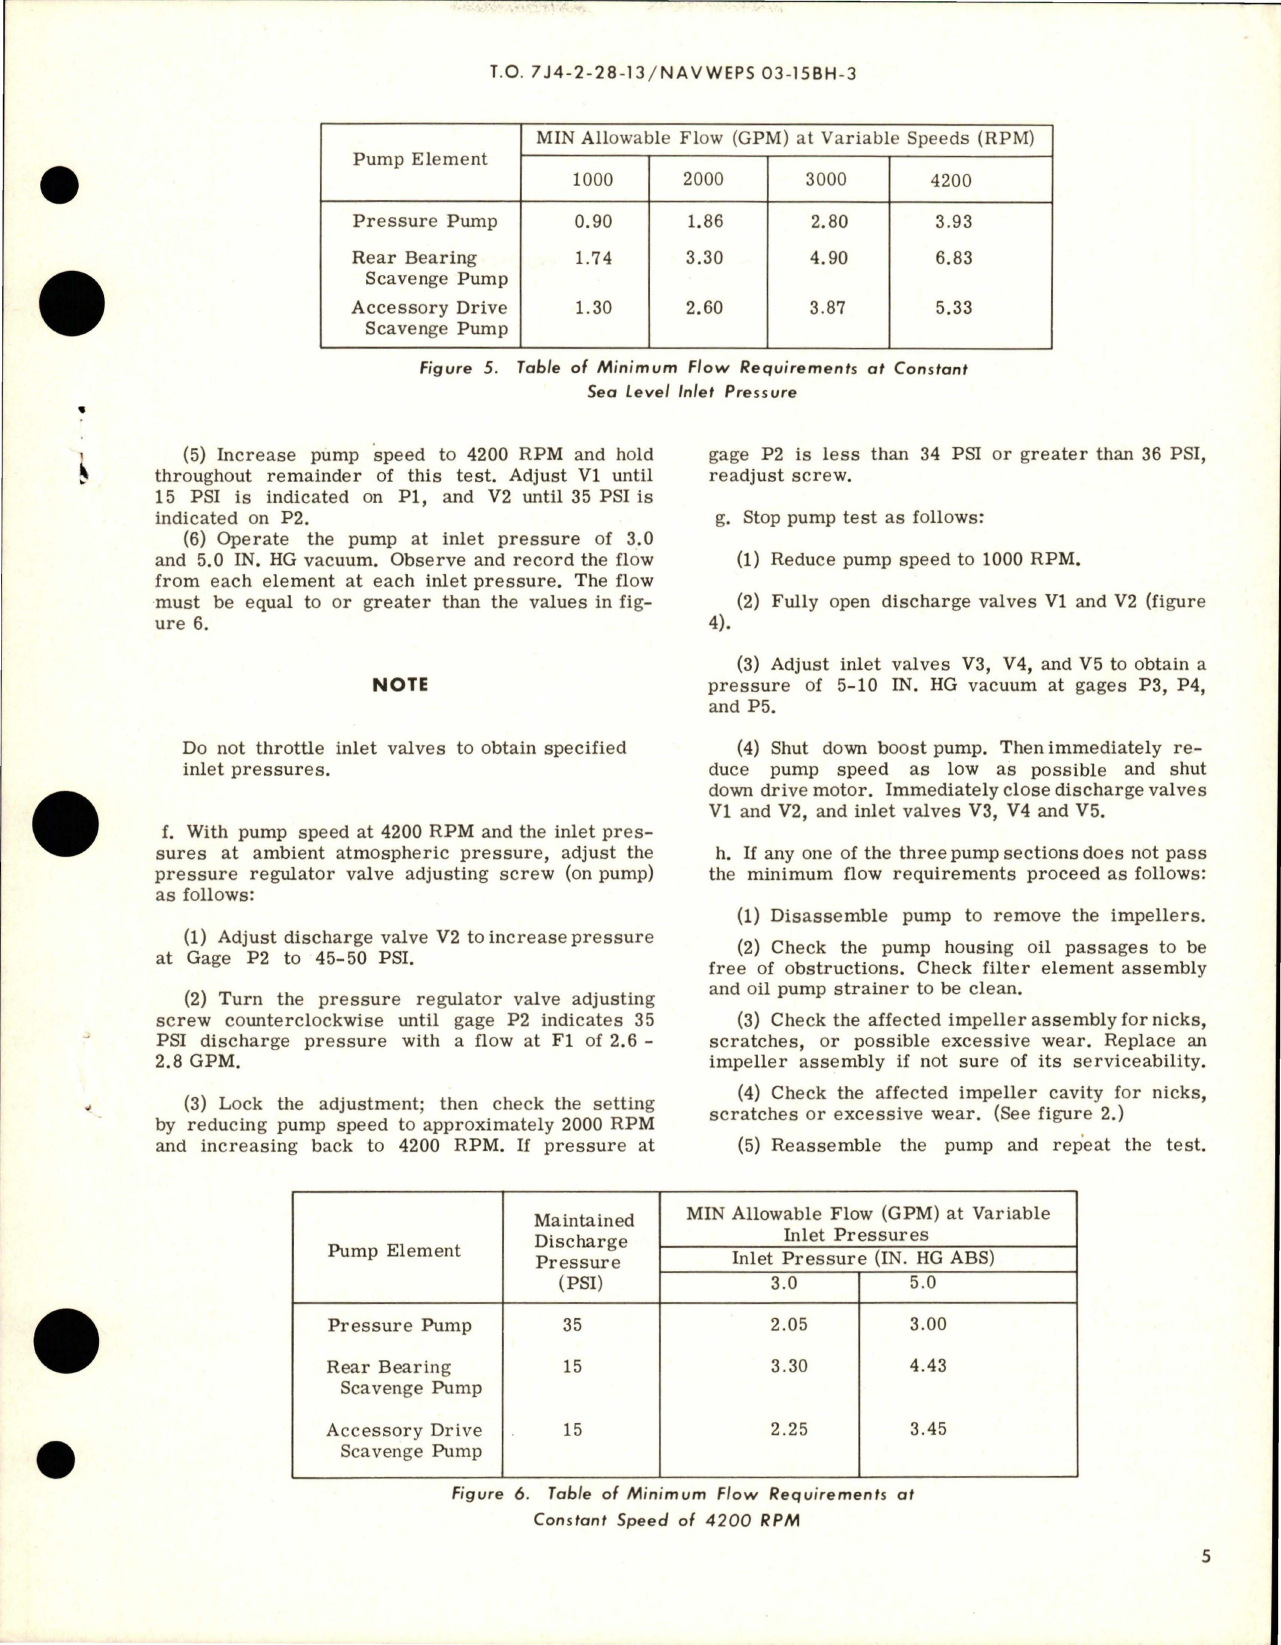 Sample page 5 from AirCorps Library document: Overhaul with Parts Breakdown for Oil Pump Assembly - Part 577340 and 700813